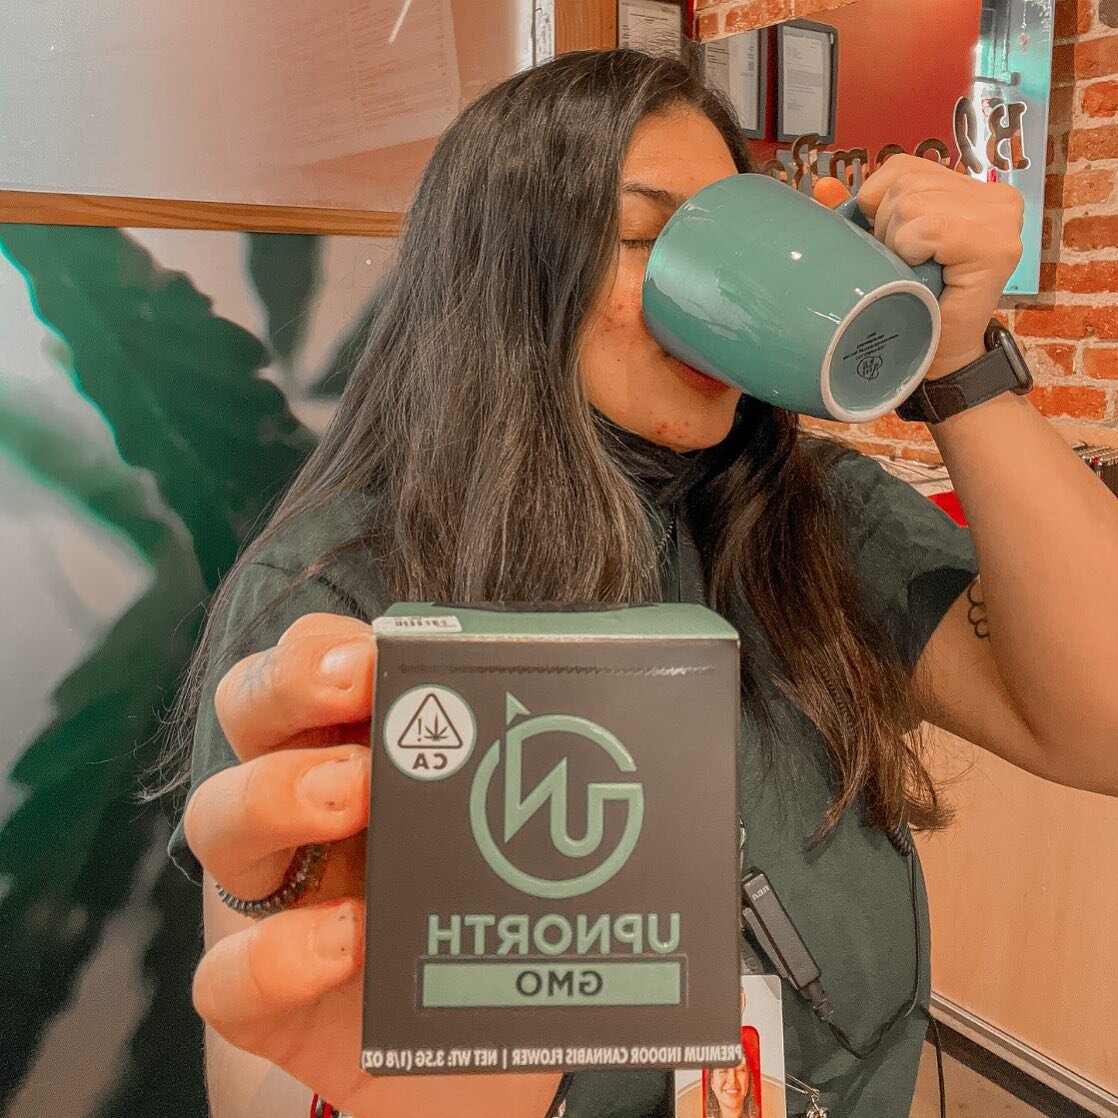 Coffee in my ✨cup✨, Weed in my ✨blunt✨. 

Starting our day right with a cup of coffee and @upnorthcannabis GMO testing at 43.7(%)!!!! 🔥😵&zwj;💫 
#bloomroomdispensaries #humpday #bayarea #california #ouid #dispensary #notforsale #wakeandbake